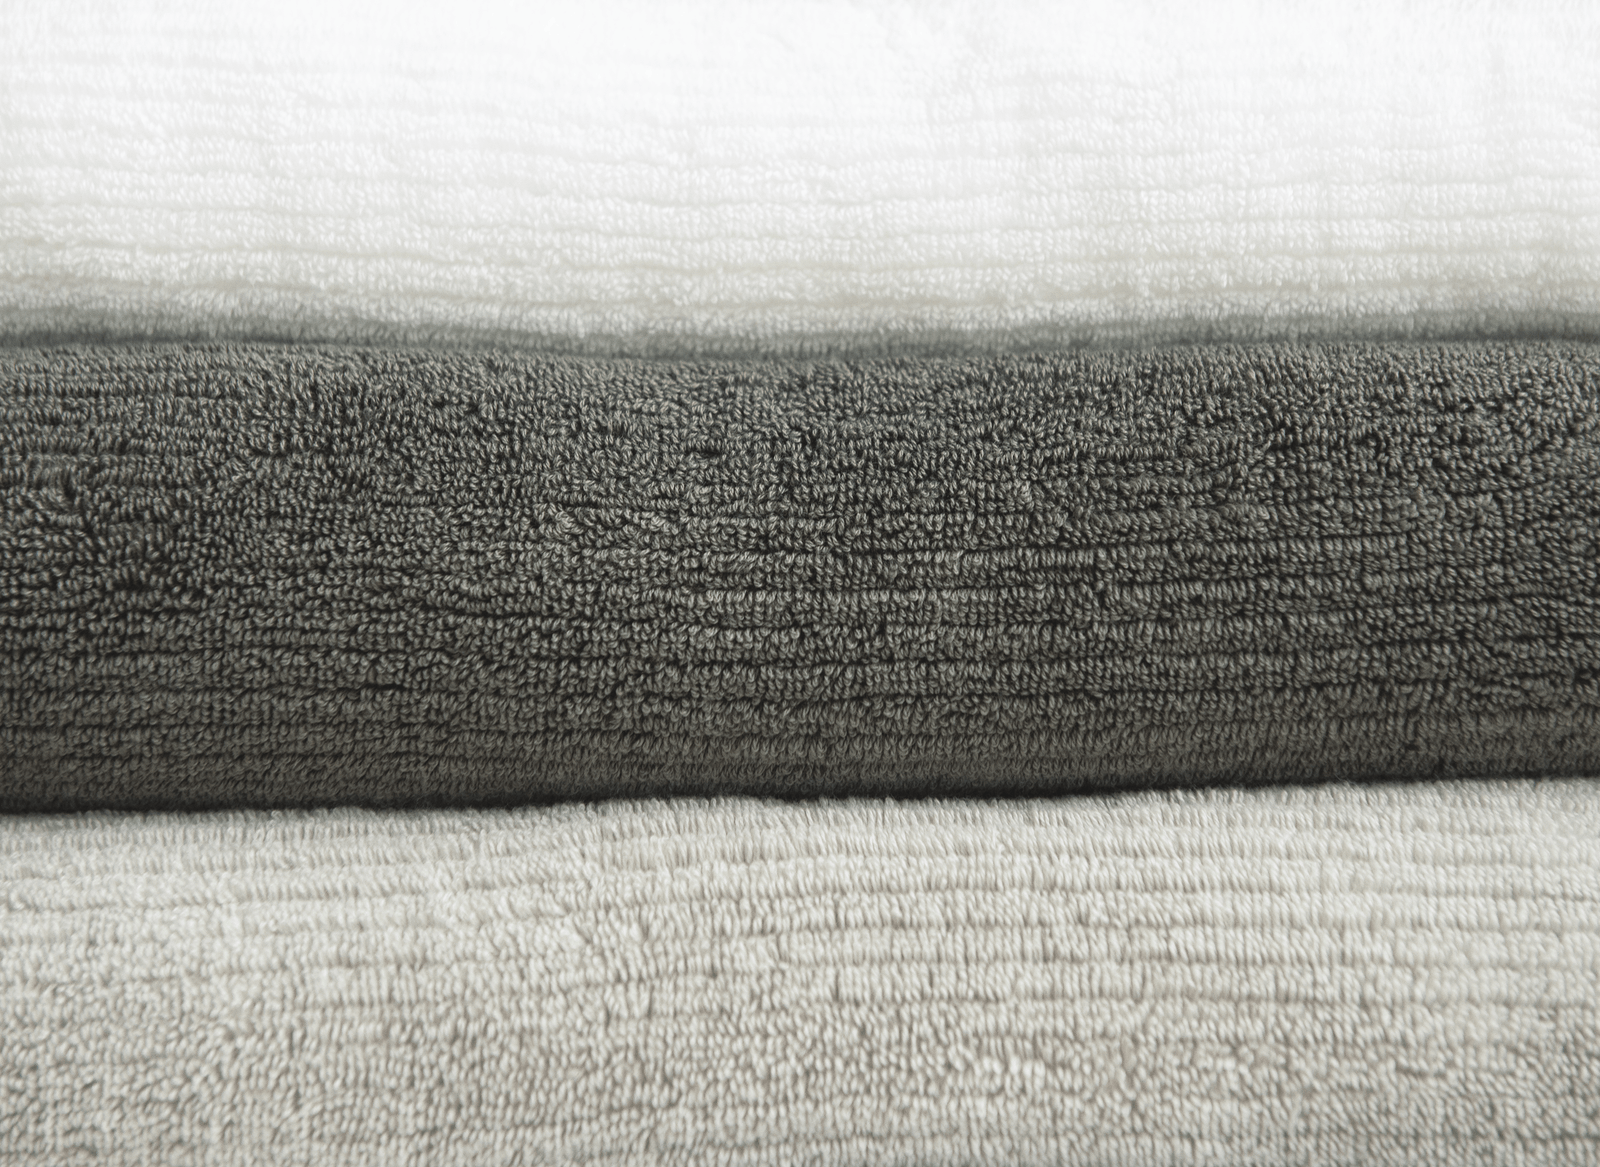 Ribbed Terry Bath Sheets in the color Charcoal Light Grey White. Photo taken close up only showing the towels.